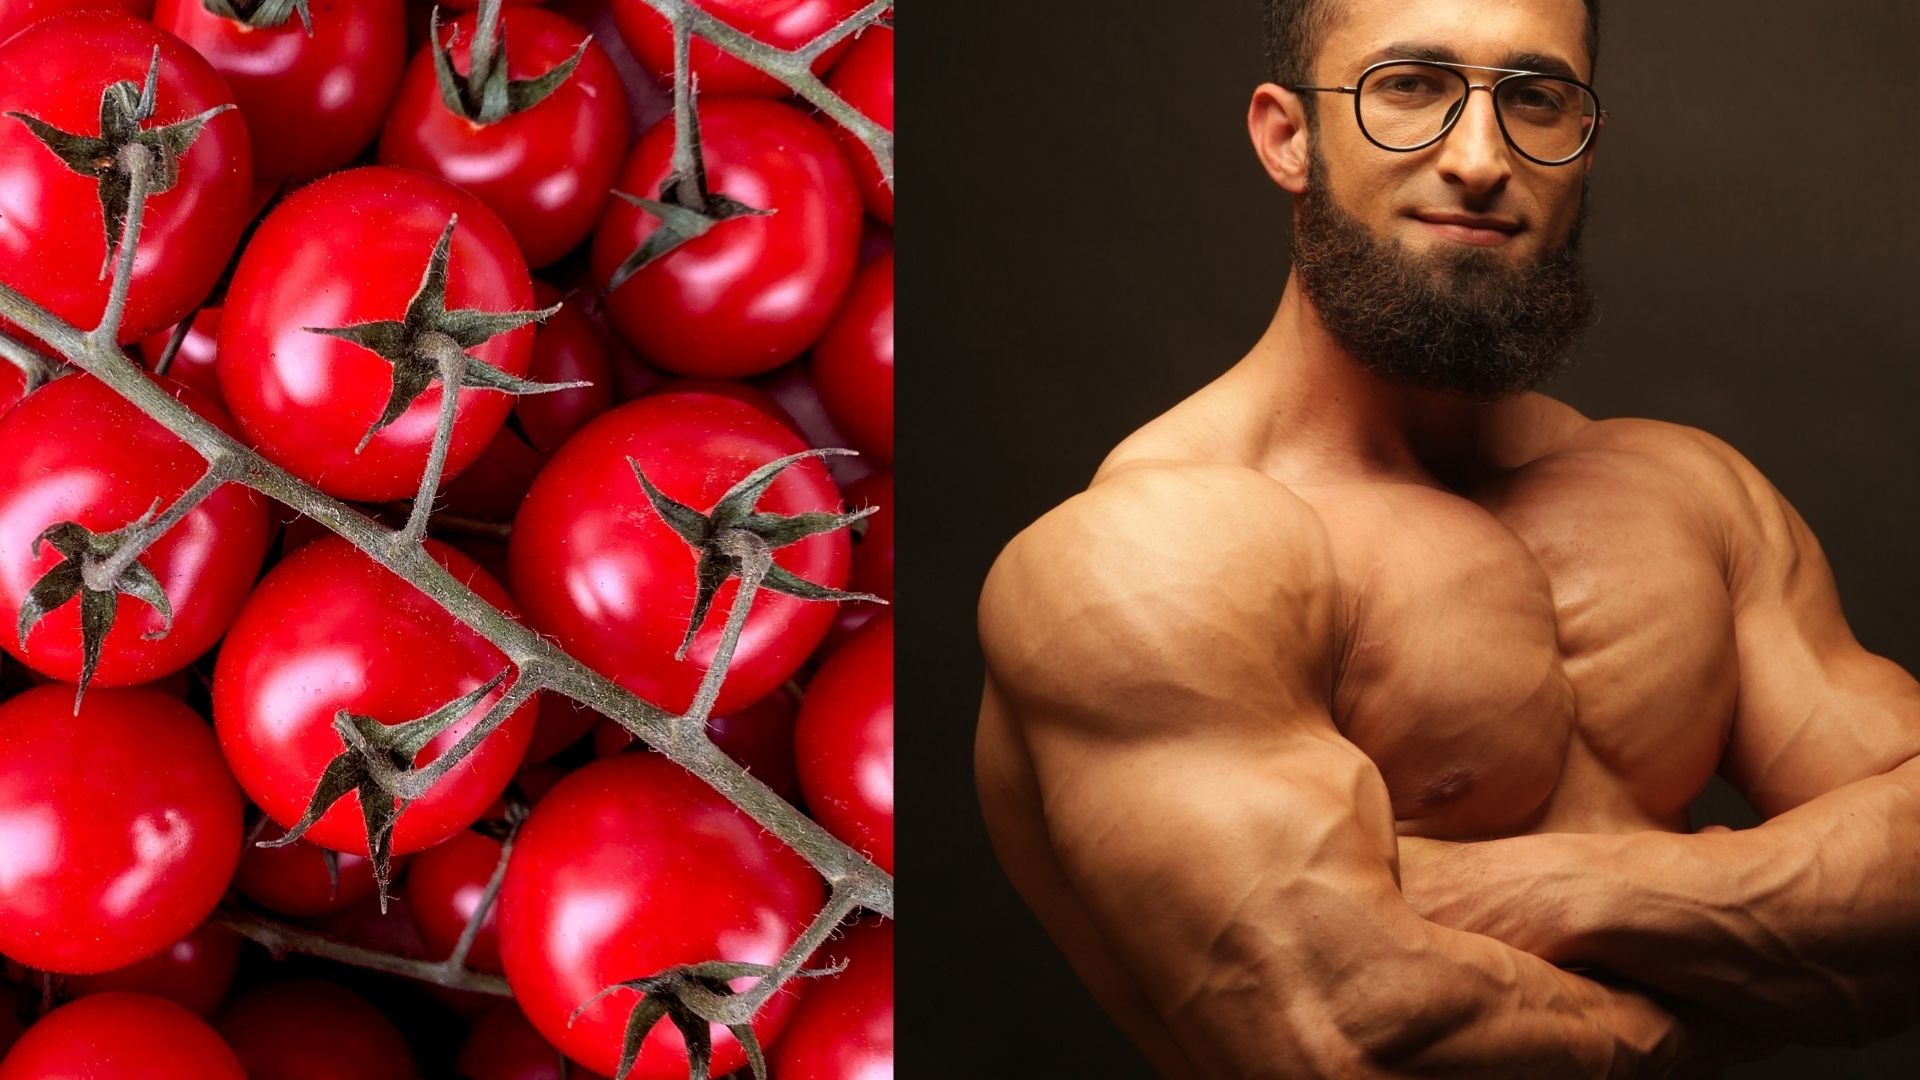 Can Eating Fresh Tomatoes And Squats Build Your Muscle